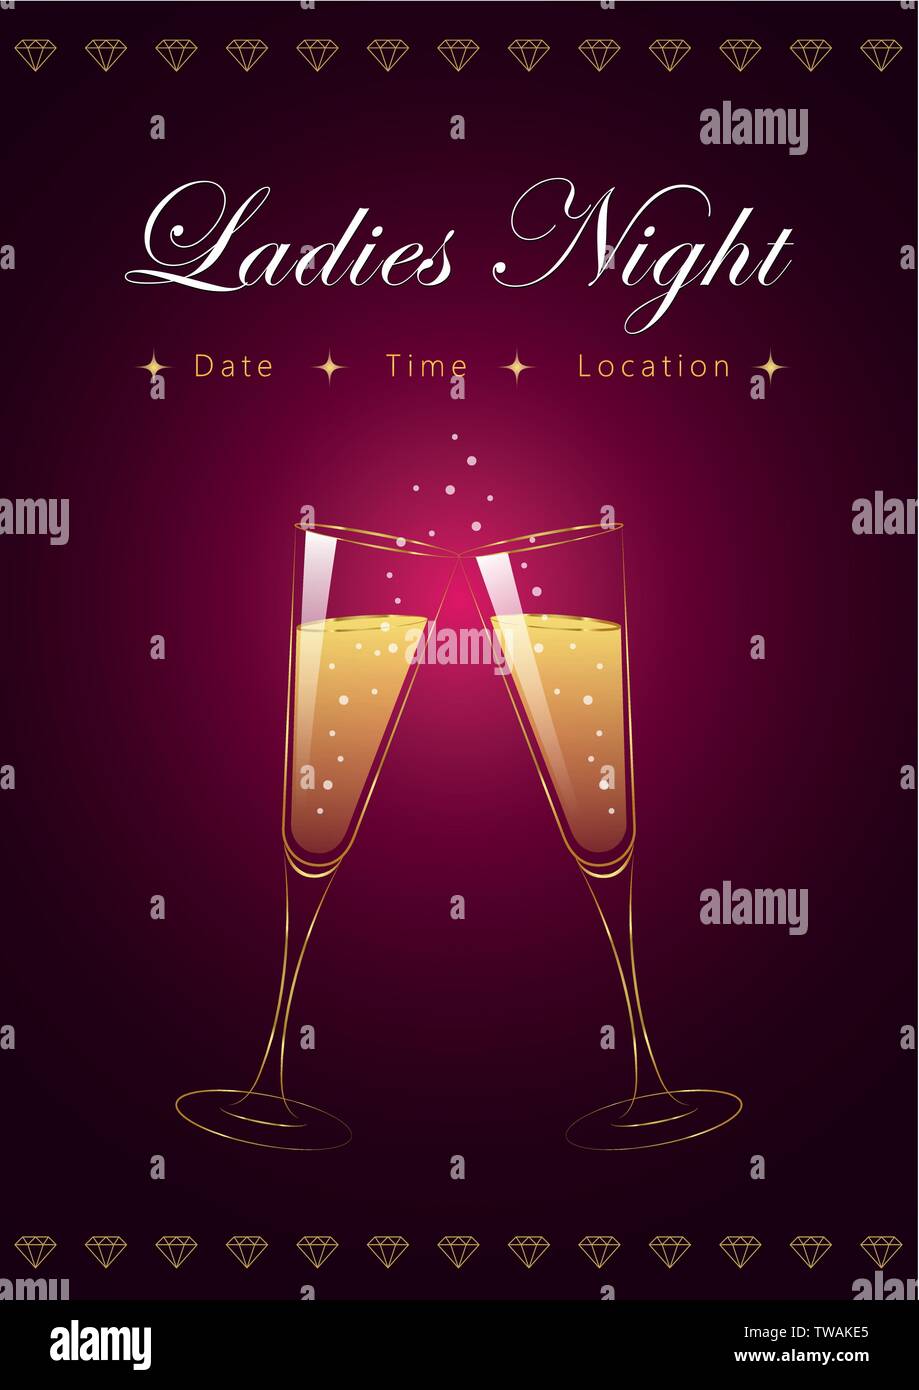 ladies night party poster with champagne glasses and diamonds vector illustration EPS10 Stock Vector